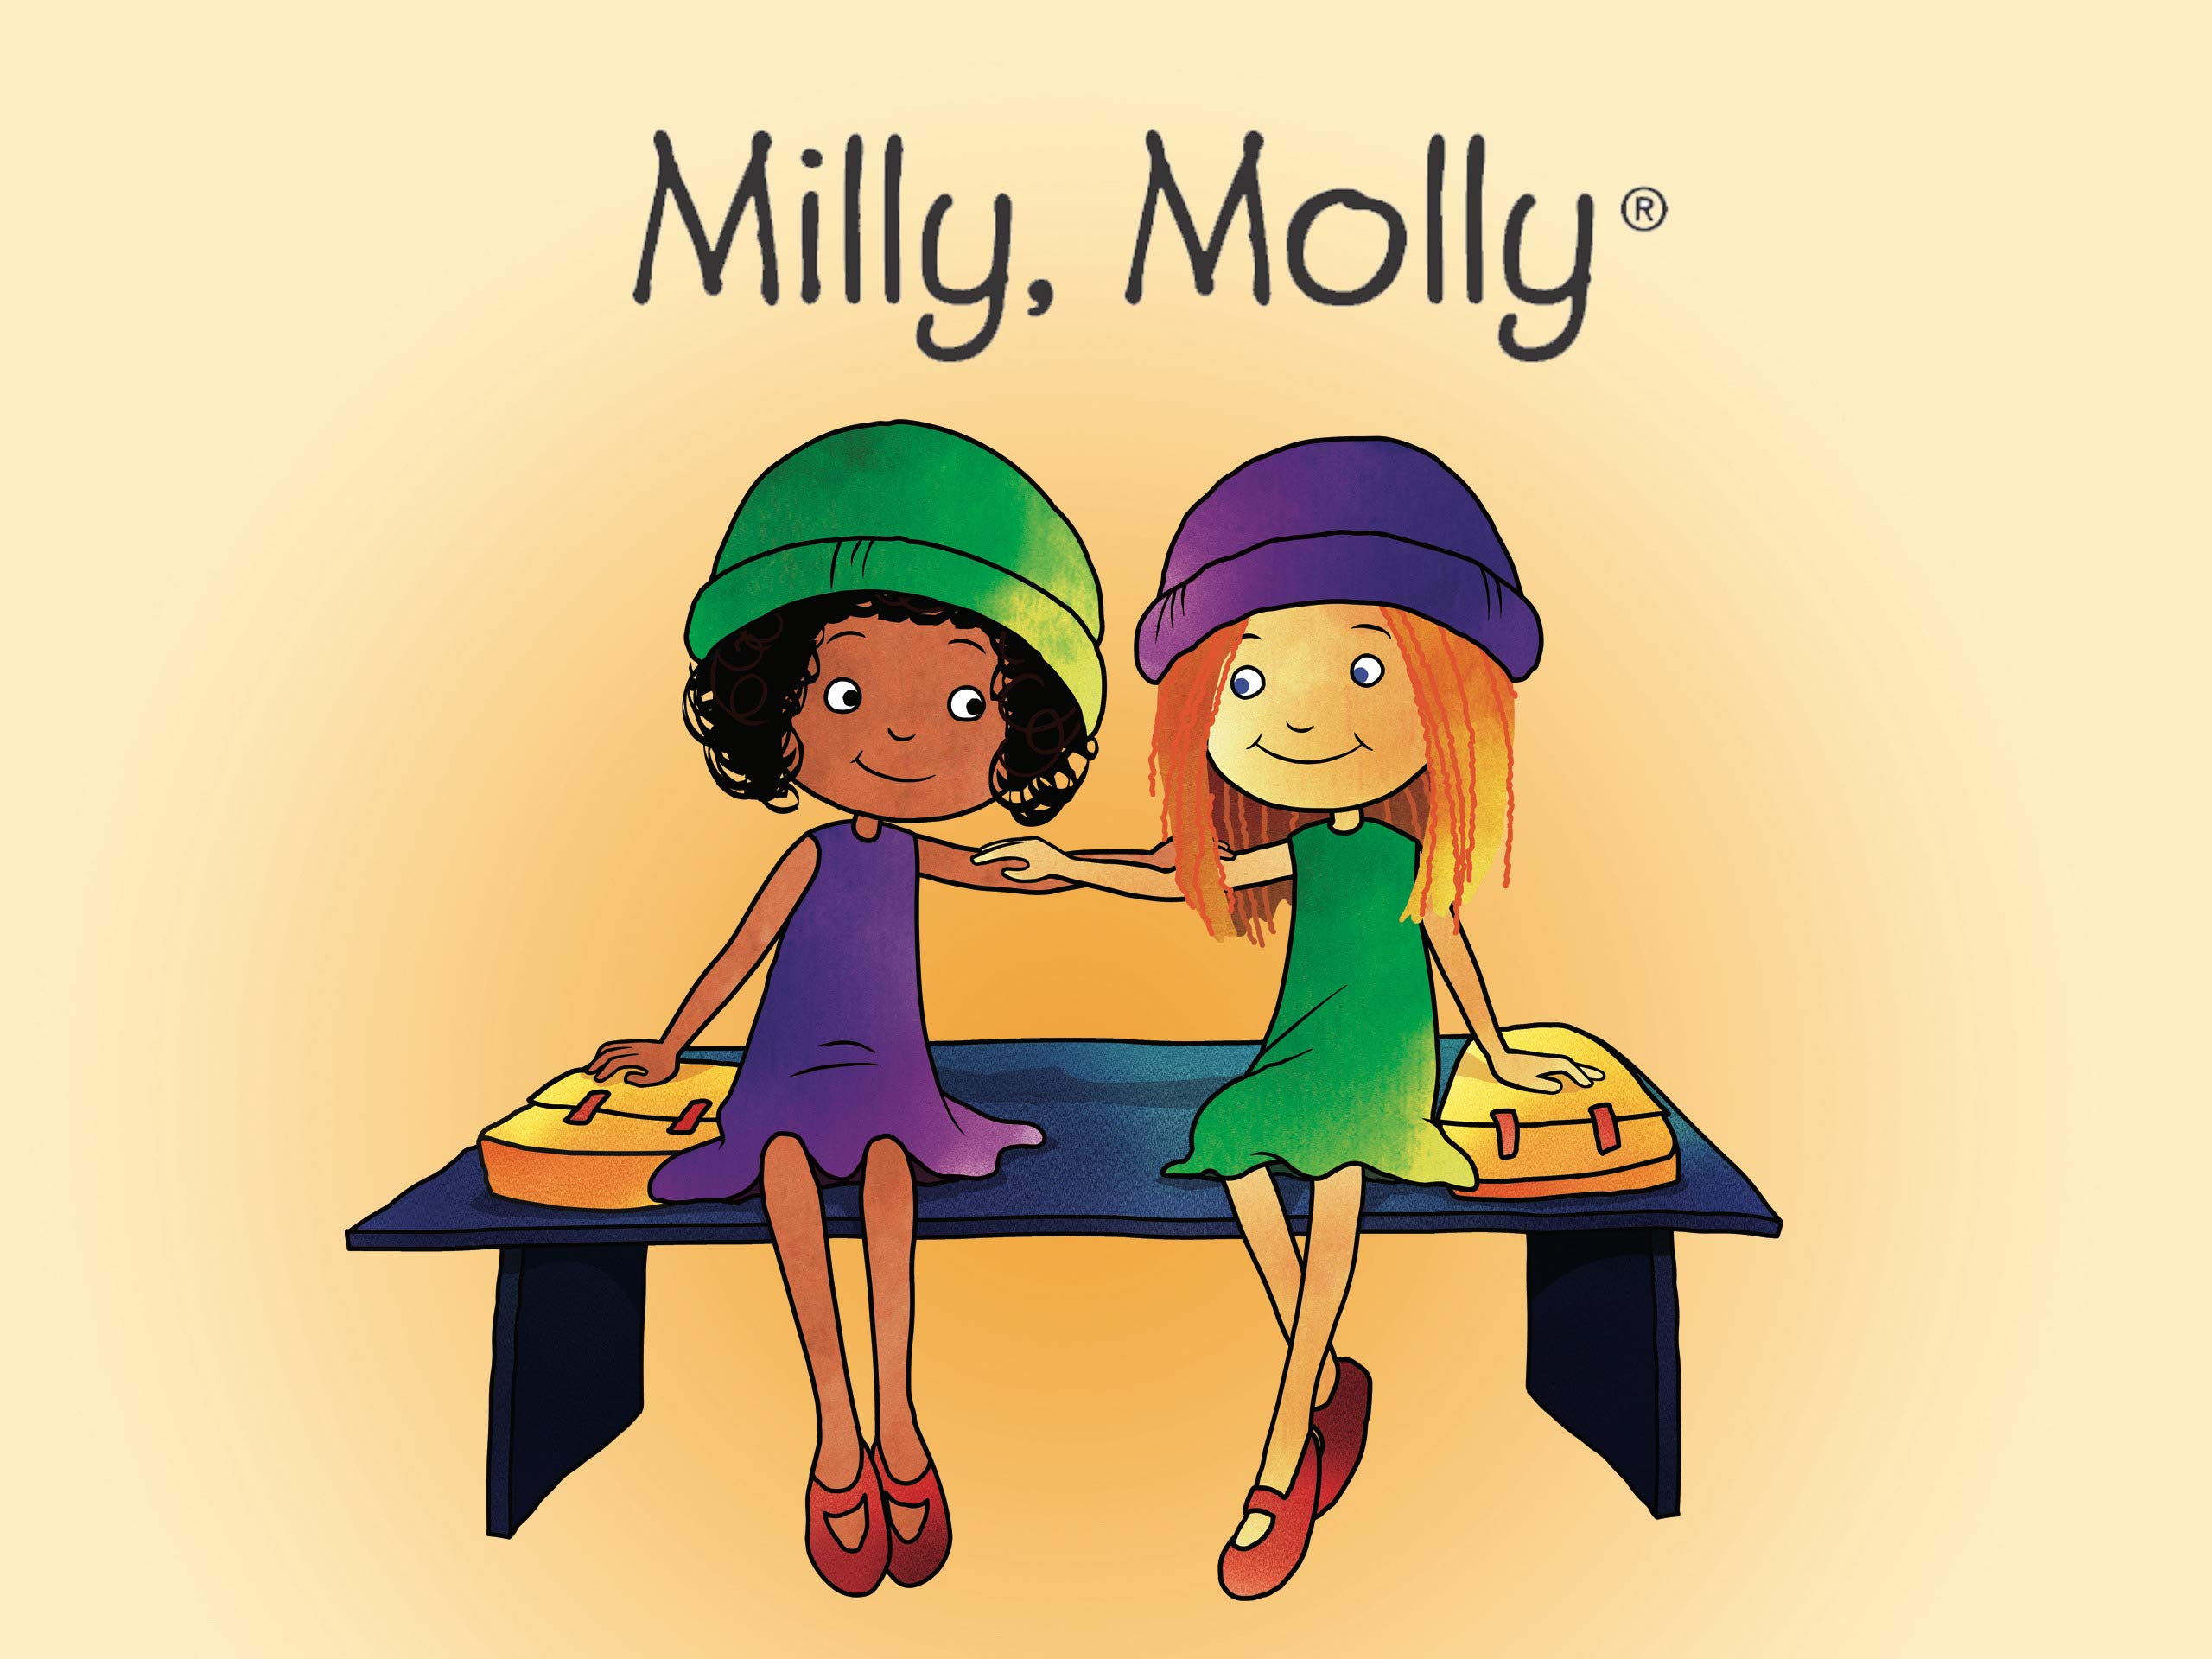 Milly molly